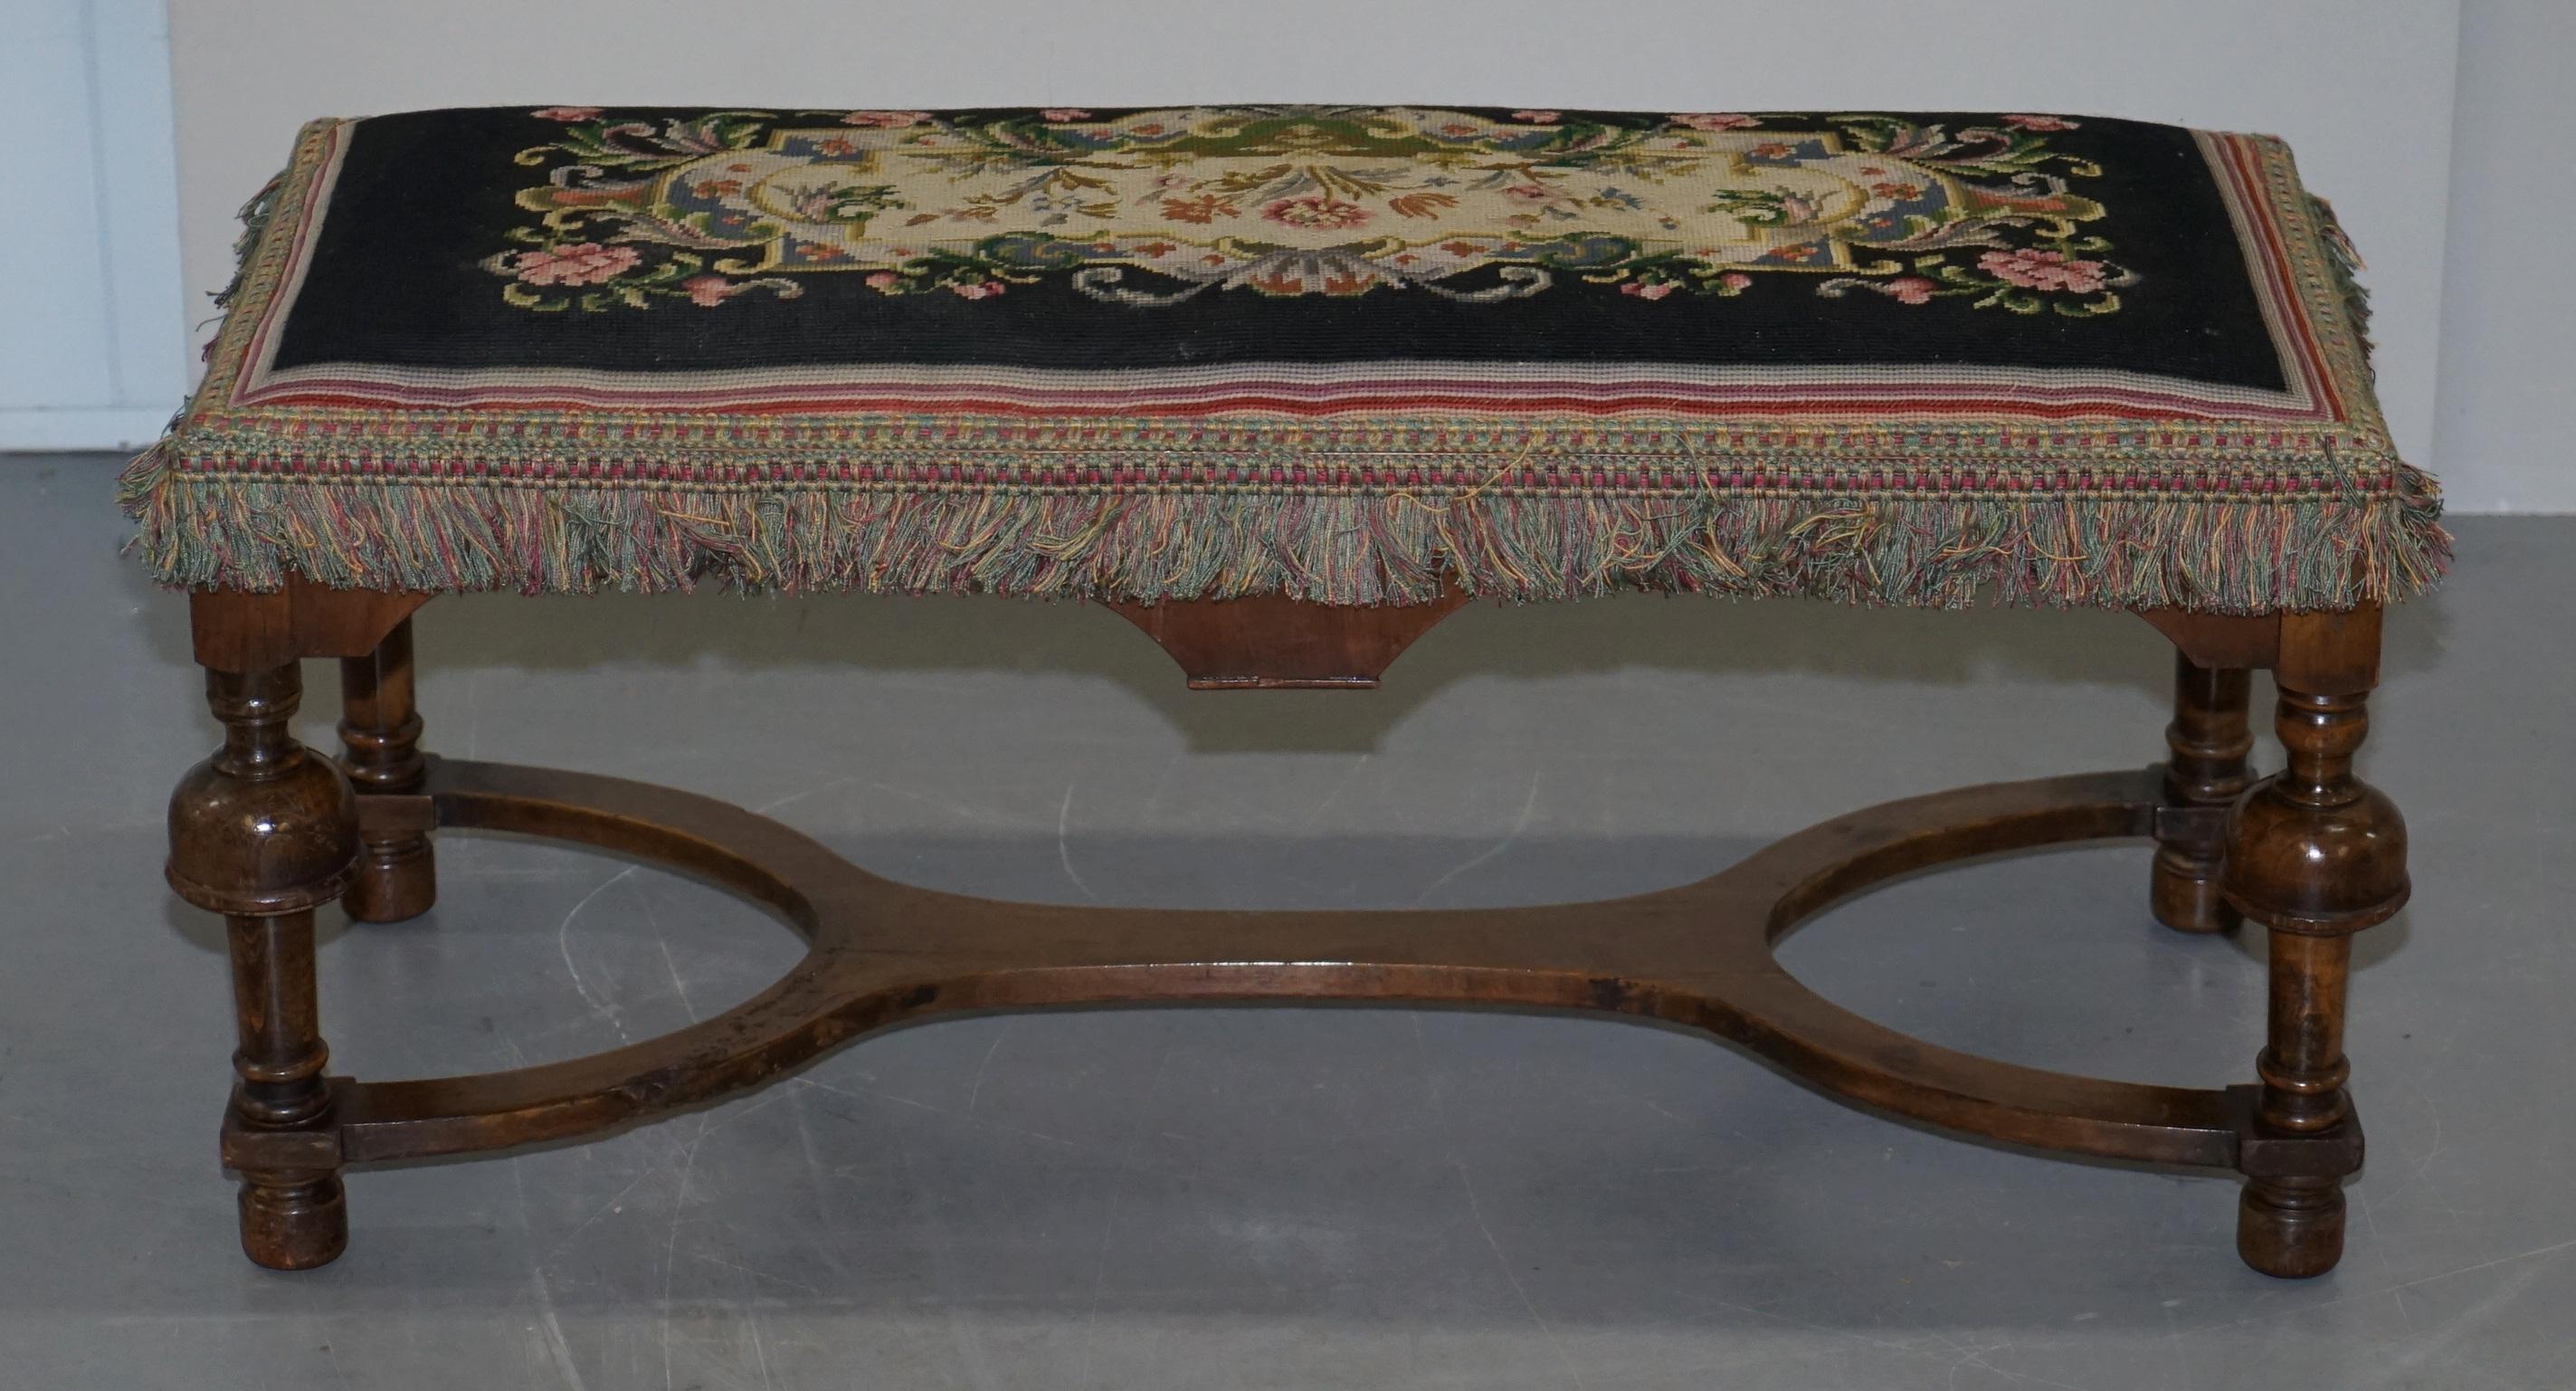 We are delighted to offer for sale this lovely Victorian bench stool made in the William and Mary style

The frame is nicely carved from solid walnut, the embroidery is period Victorian and finished to a very high standard

In terms of the